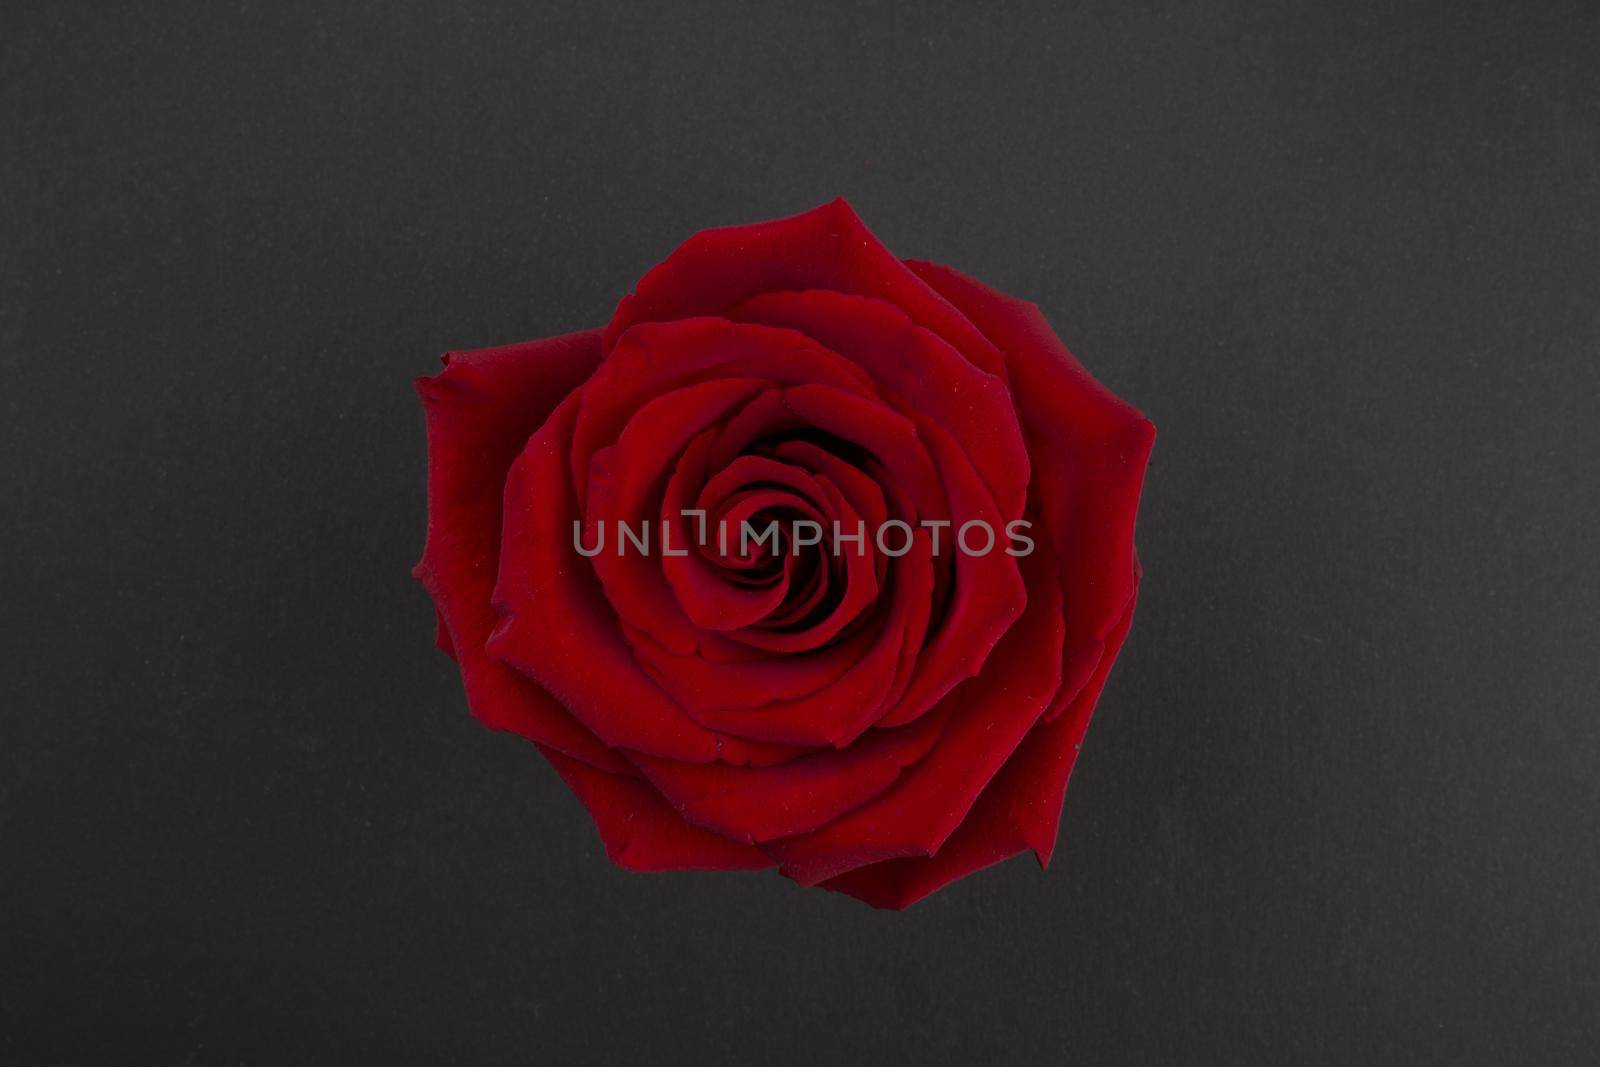 Red rose for St. Valentine's Day. Flowerhead of red rose on black paper background. Top view of a big red rose flower in the center of the photo.